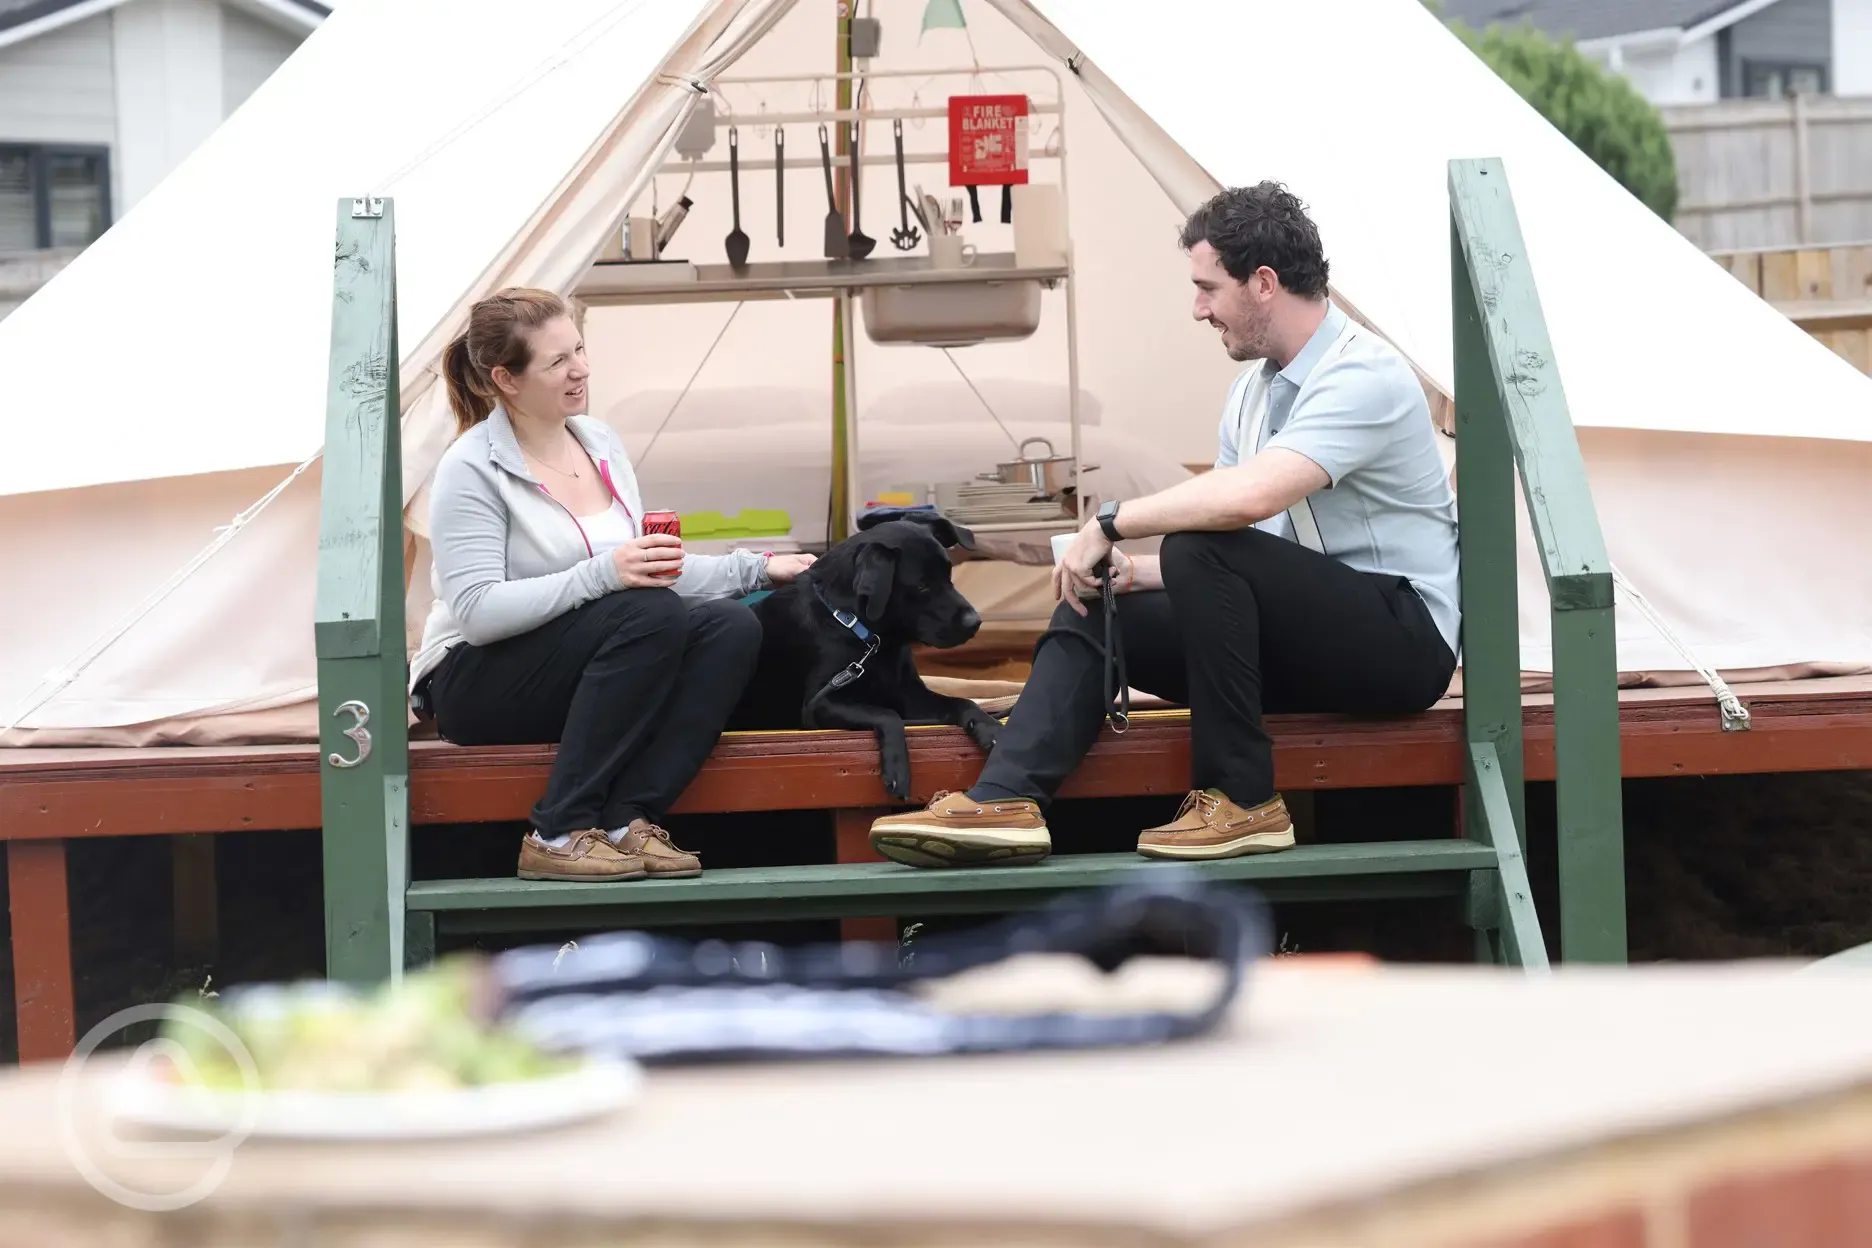 Dog friendly bell tents